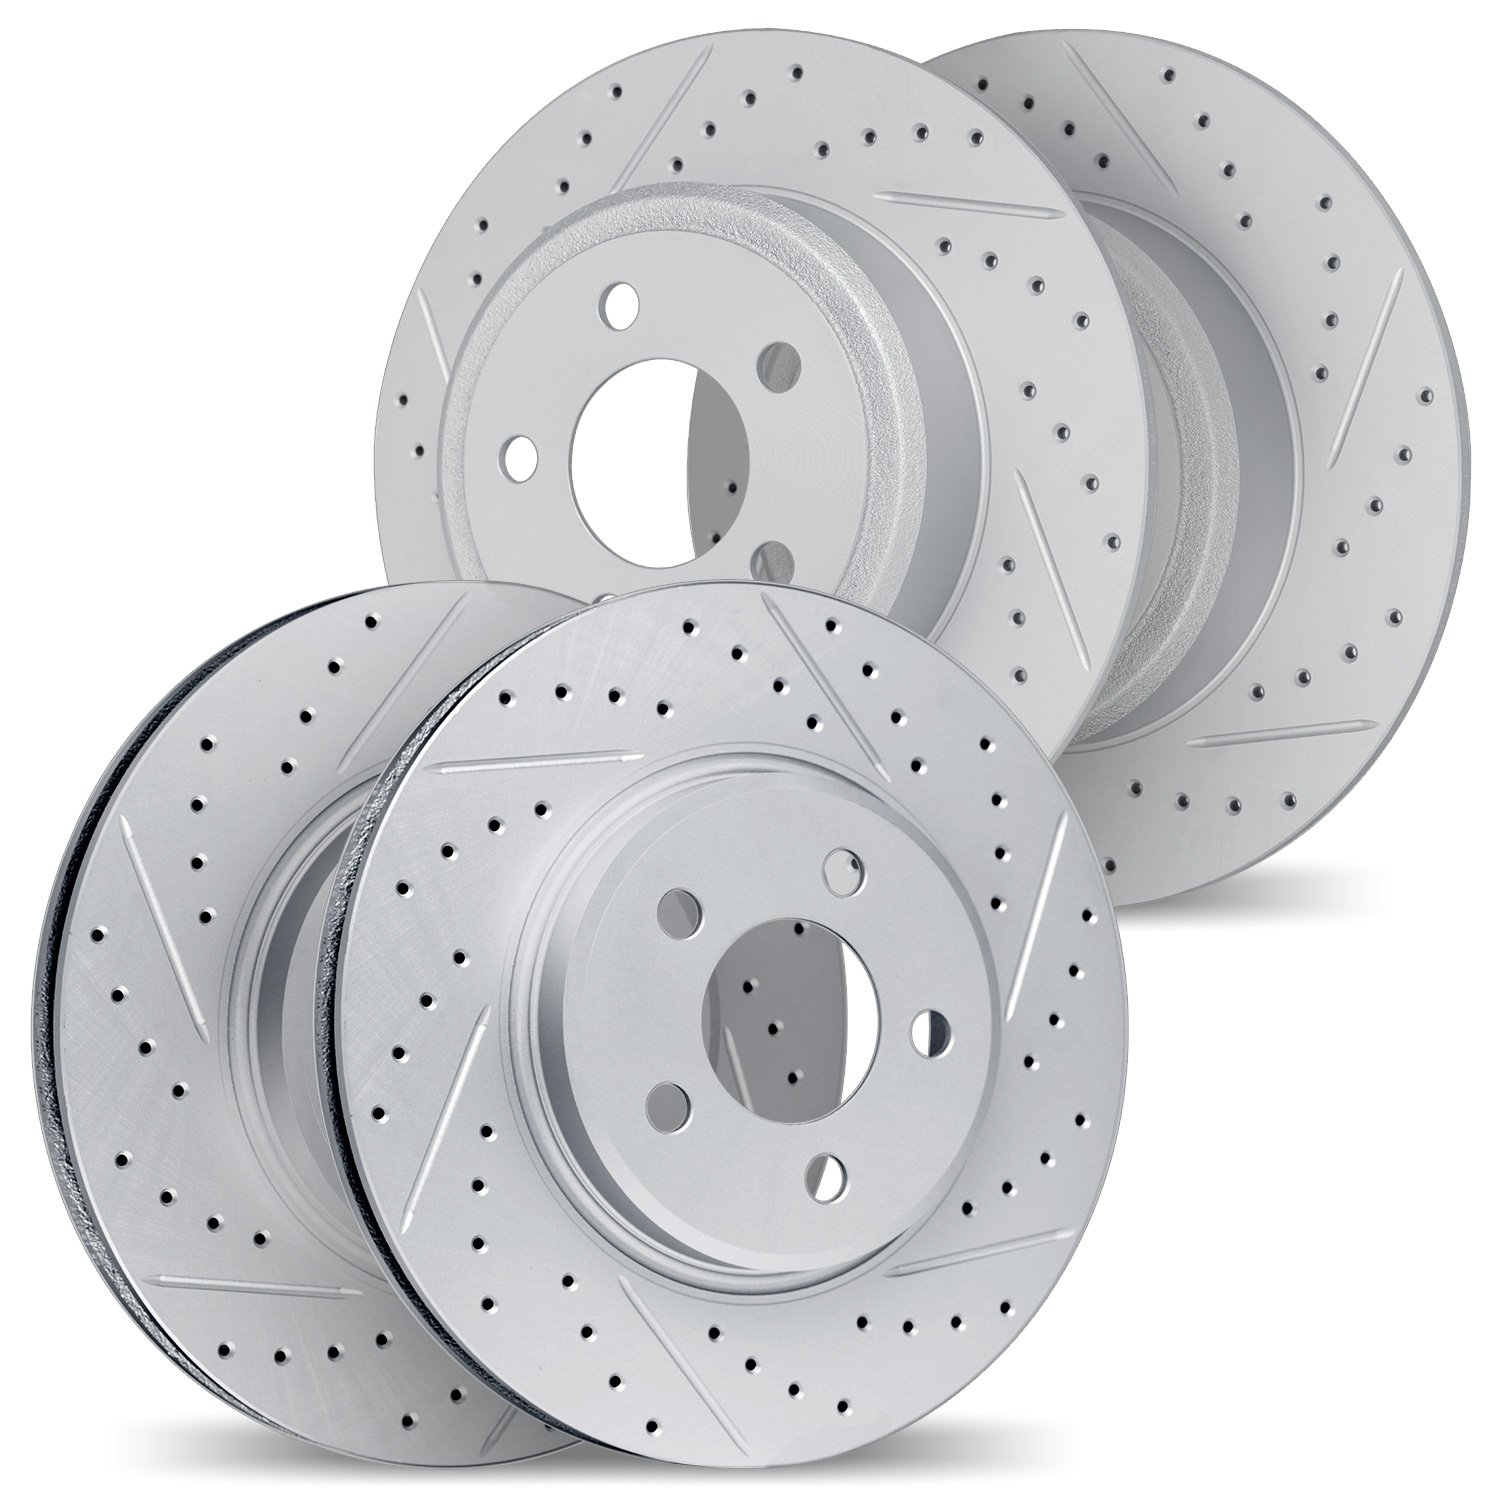 2004-59022 Geoperformance Drilled/Slotted Brake Rotors, 2003-2007 Acura/Honda, Position: Front and Rear